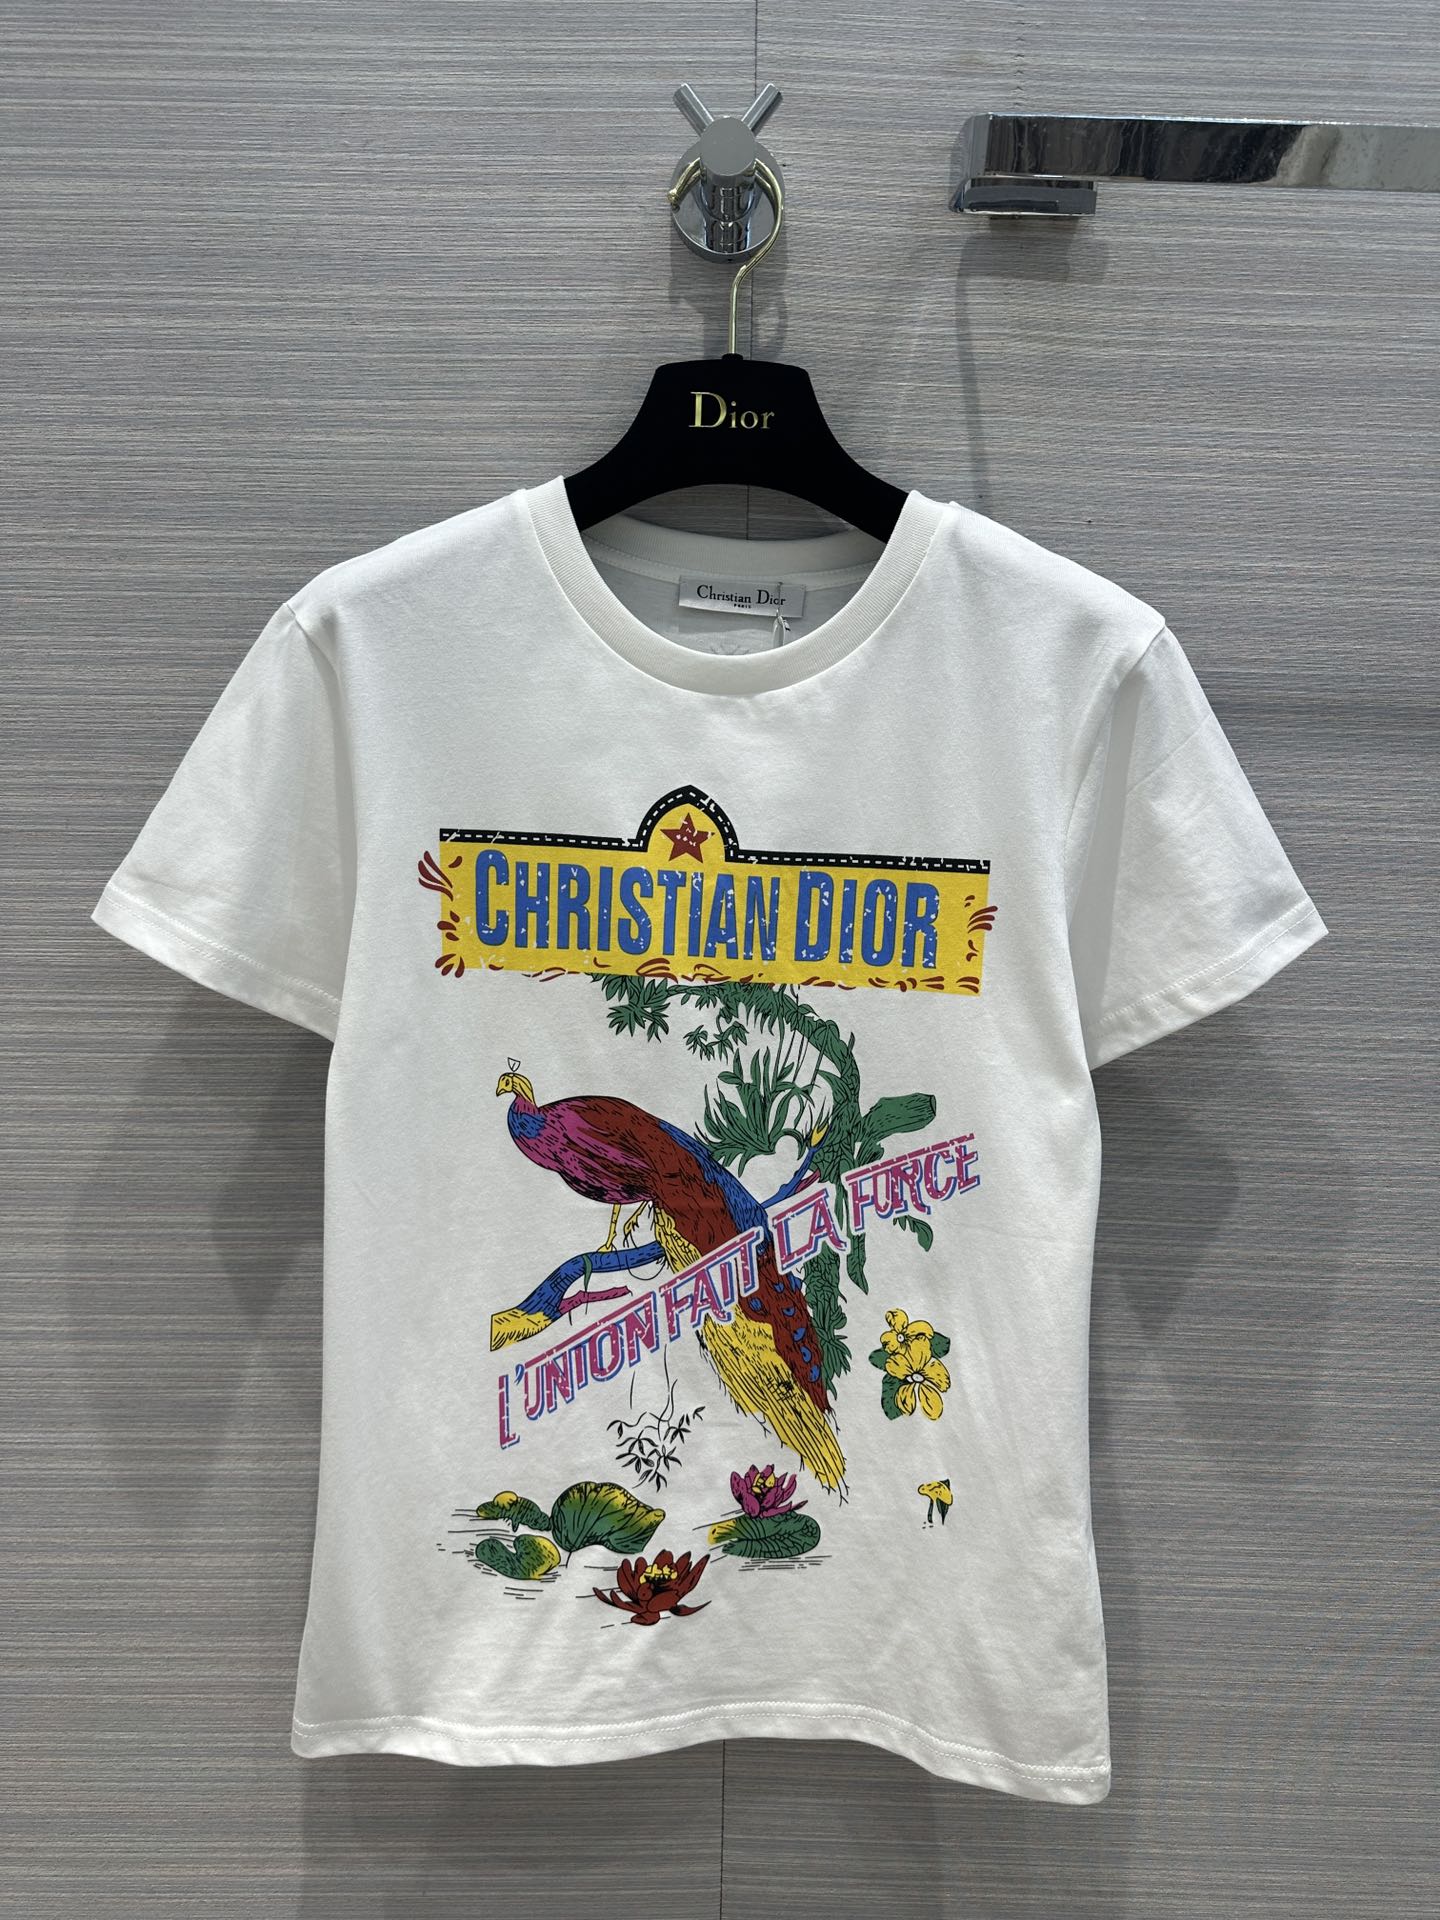 Dior Clothing T-Shirt Black White Printing Cotton Fall Collection